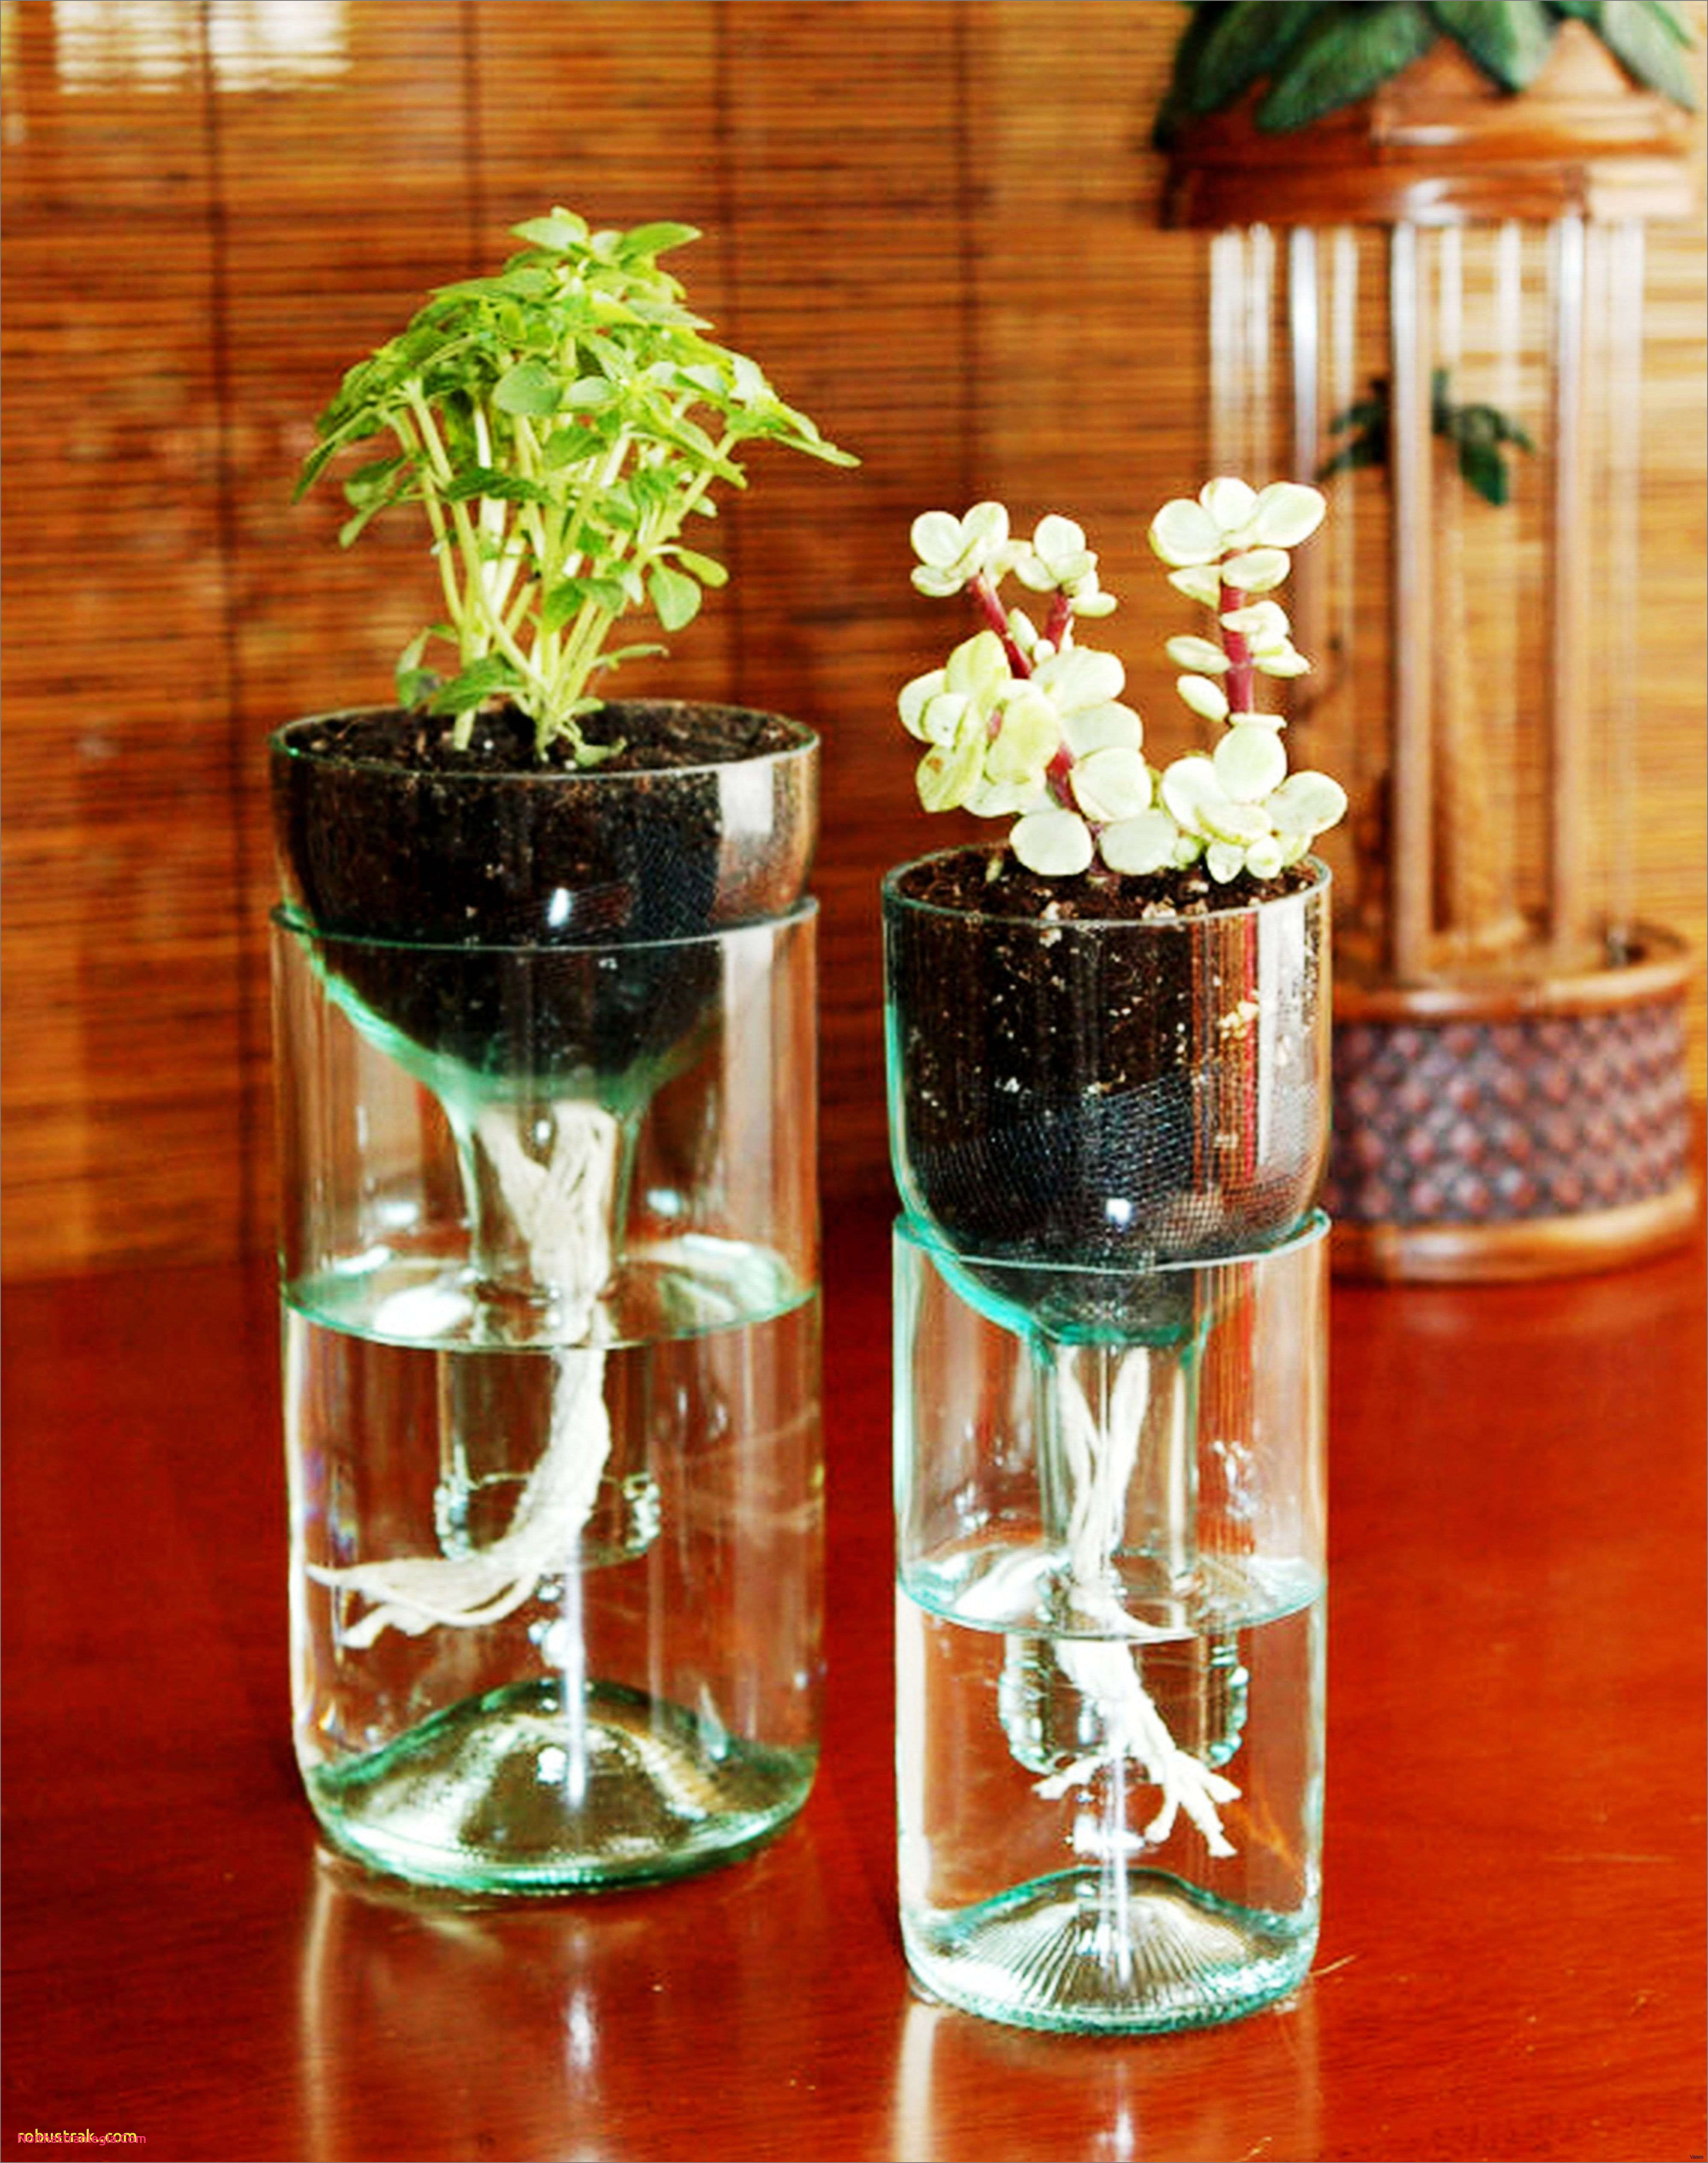 waterford flower vase of 20 how to make mercury glass vases noithattranlegia vases design in glass bowl centerpiece decorating ideas awesome unique glass bowl centerpiece decorating ideas